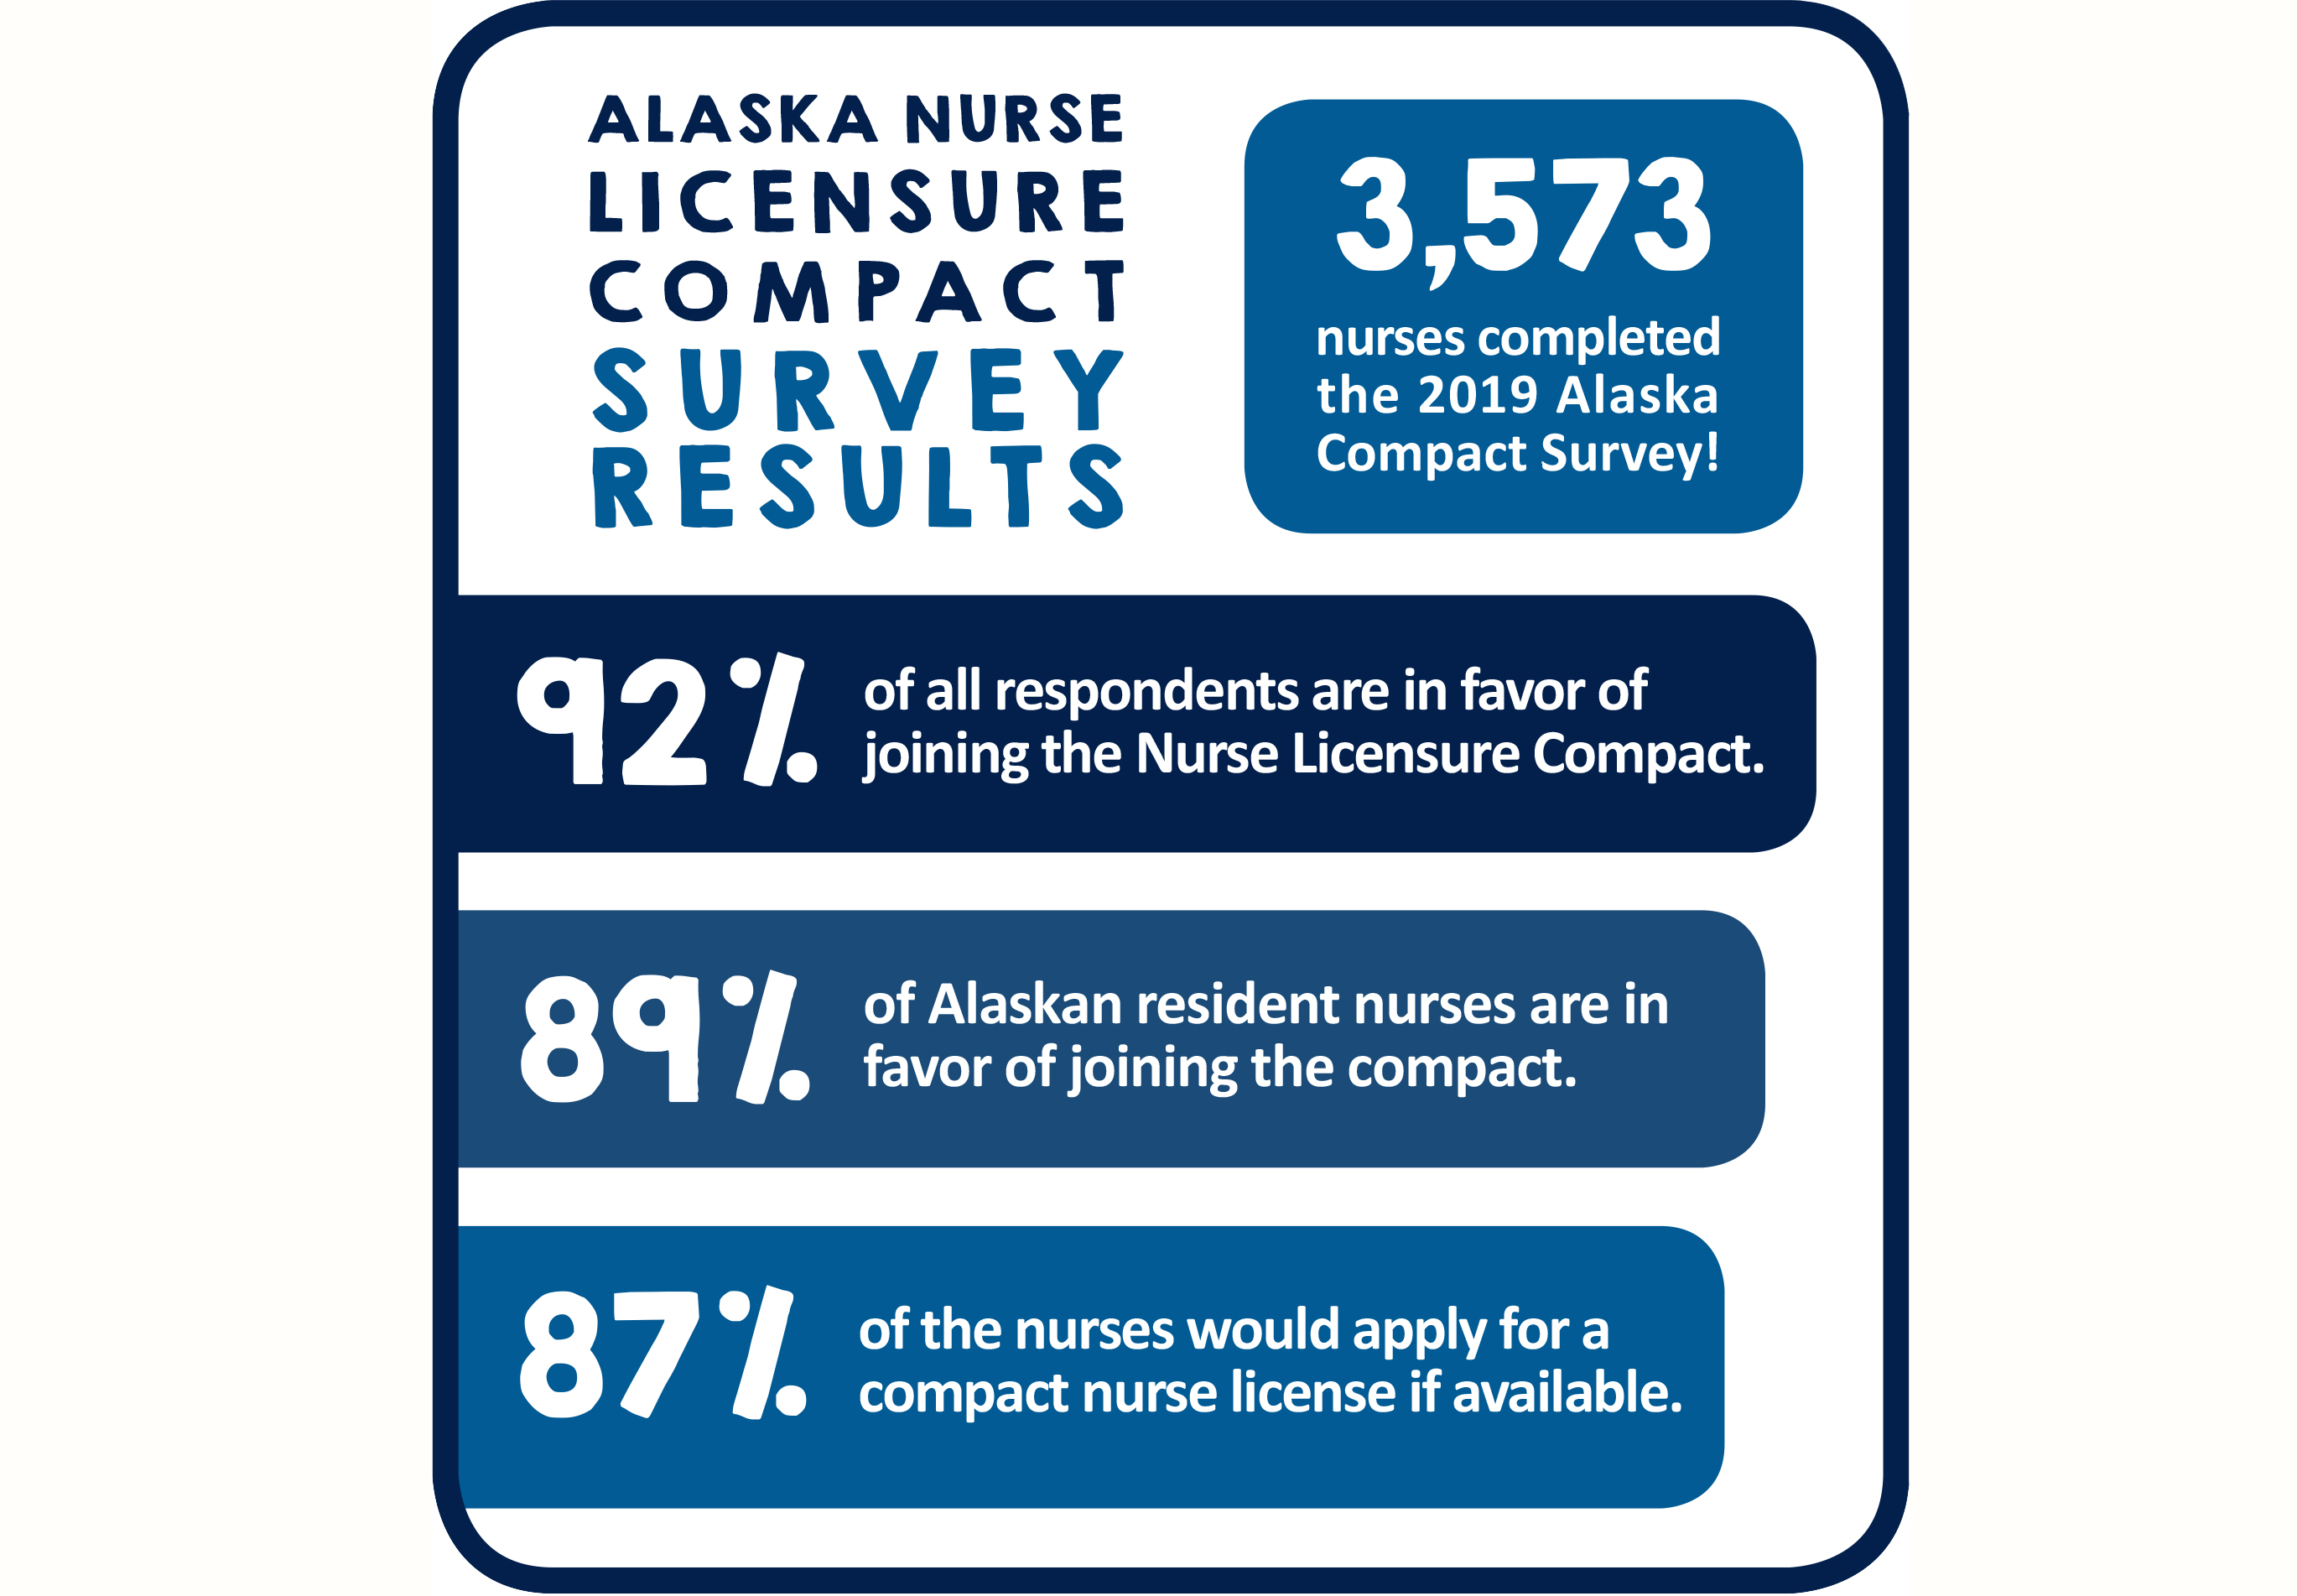 NLC Licensure Compact Infographic